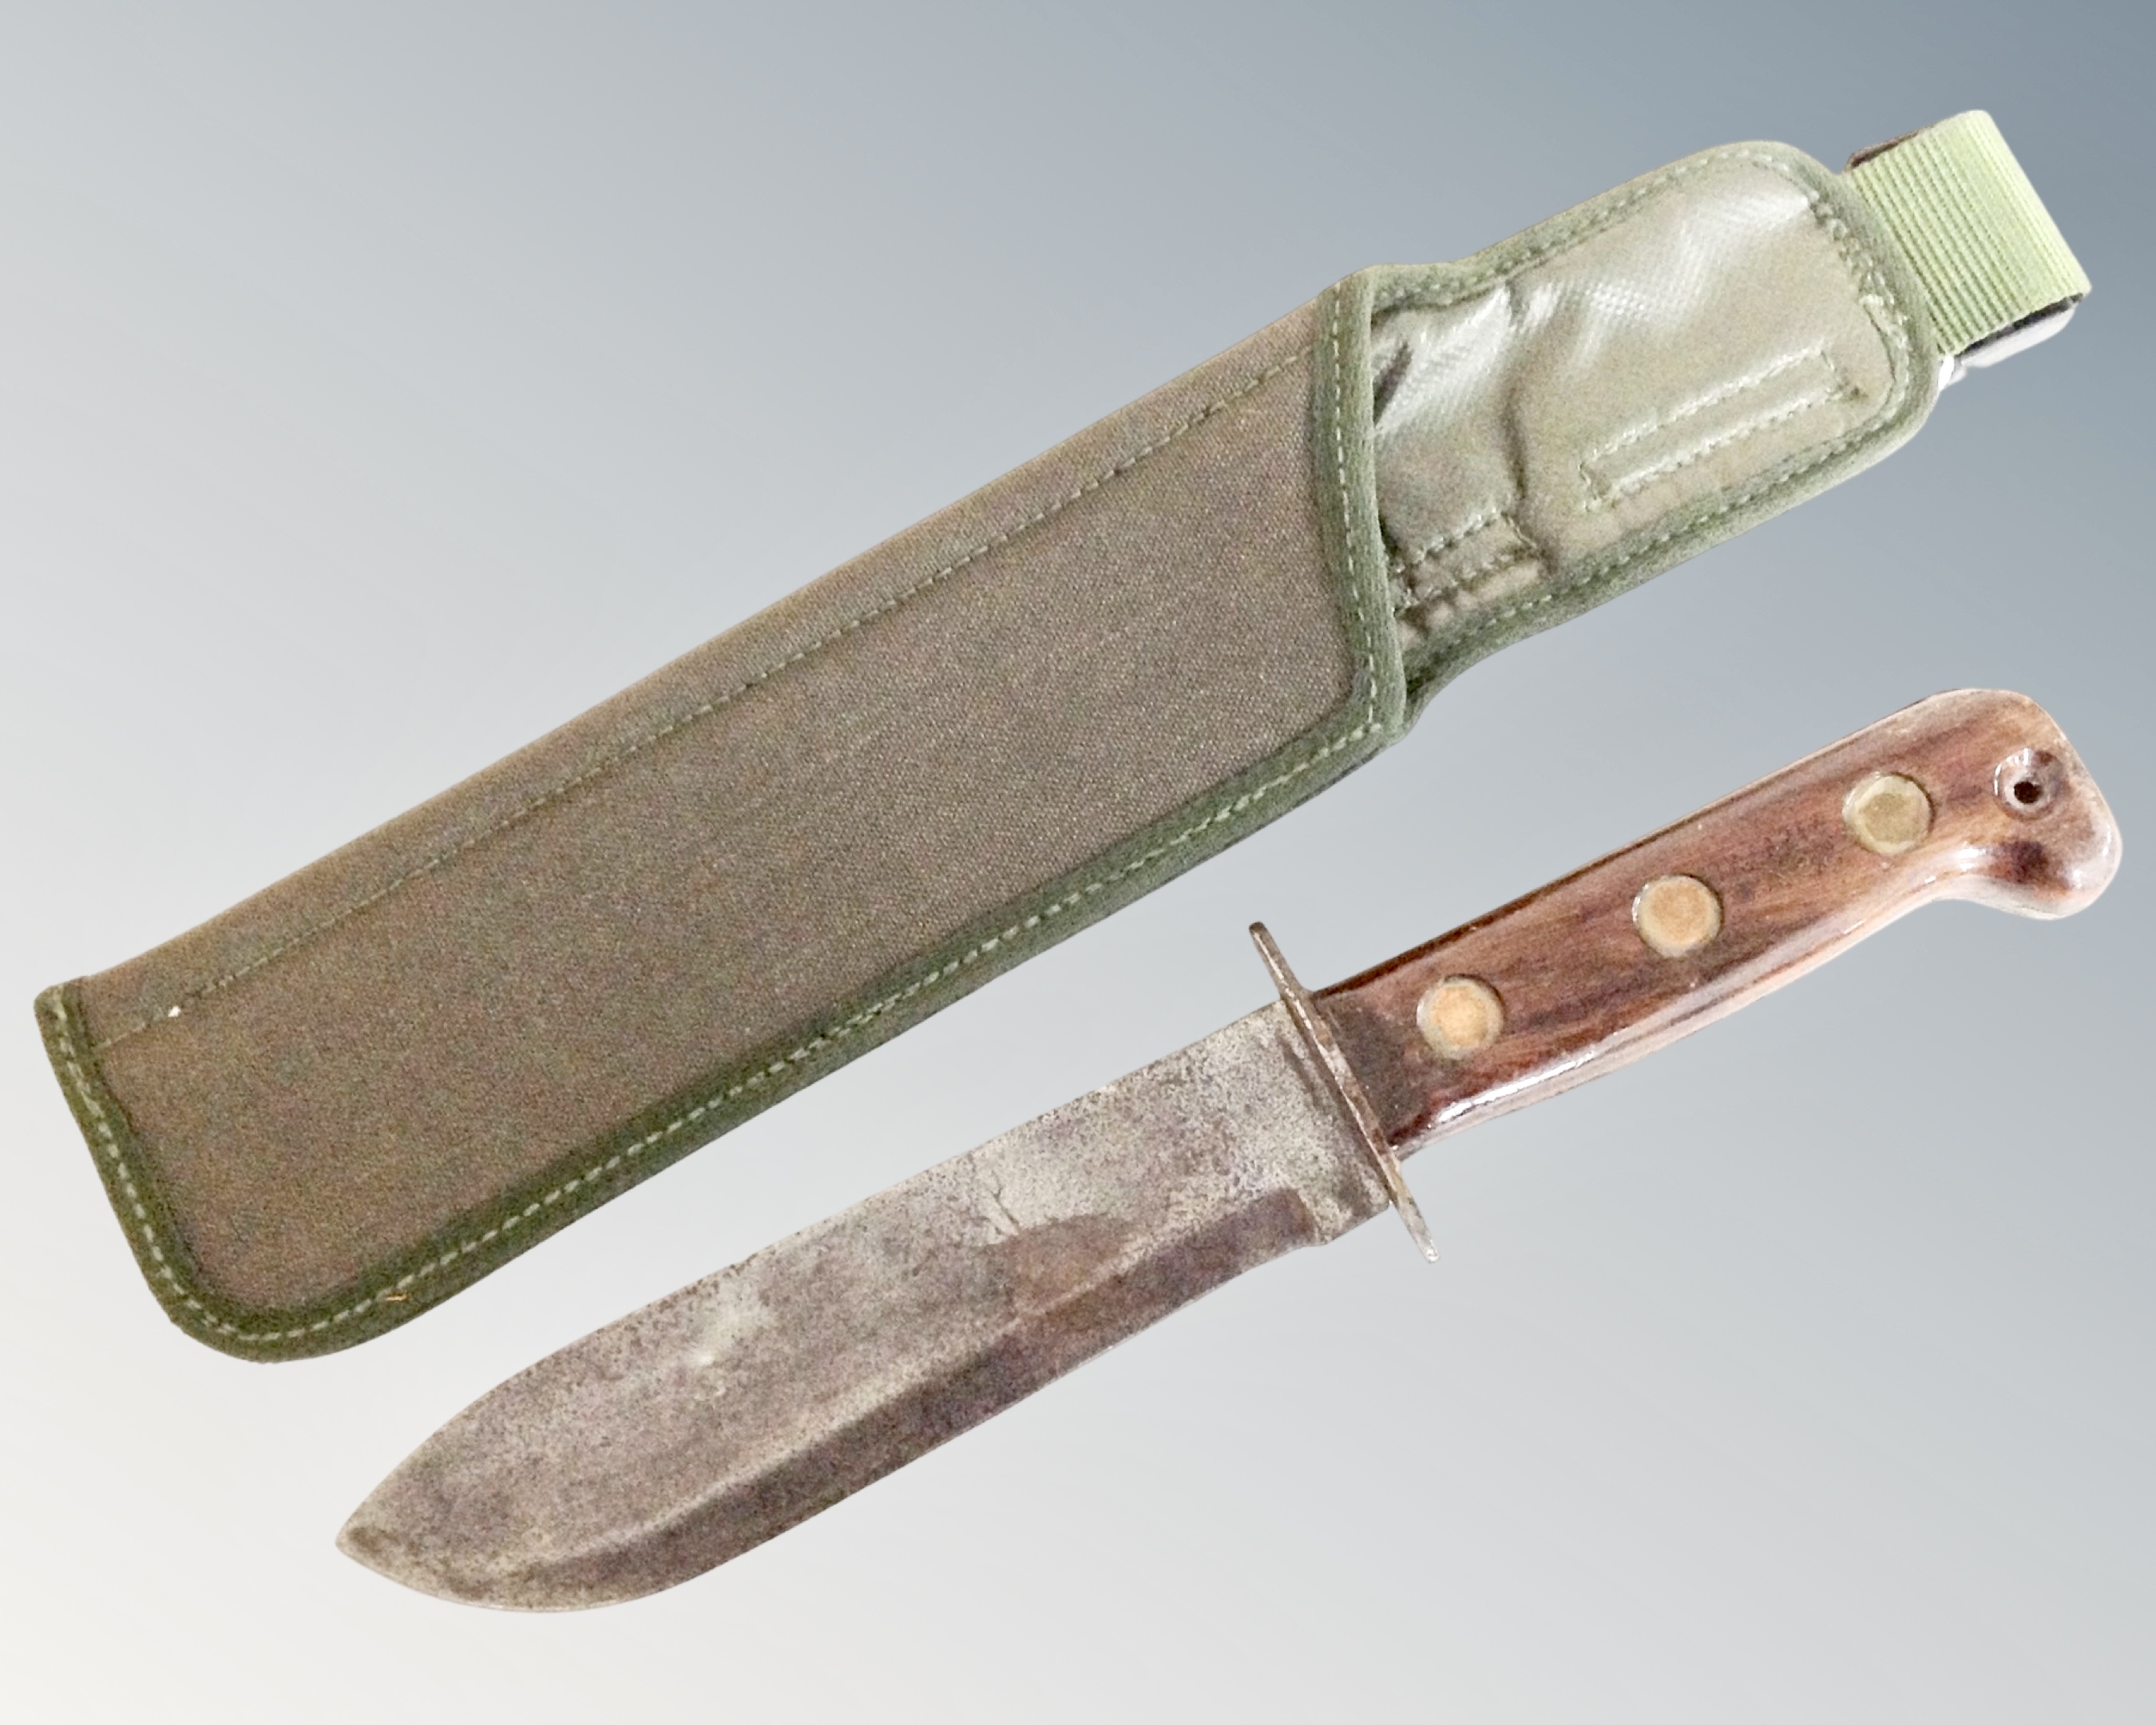 A British Army survival knife with arrow and B2 markings, in canvas scabbard.